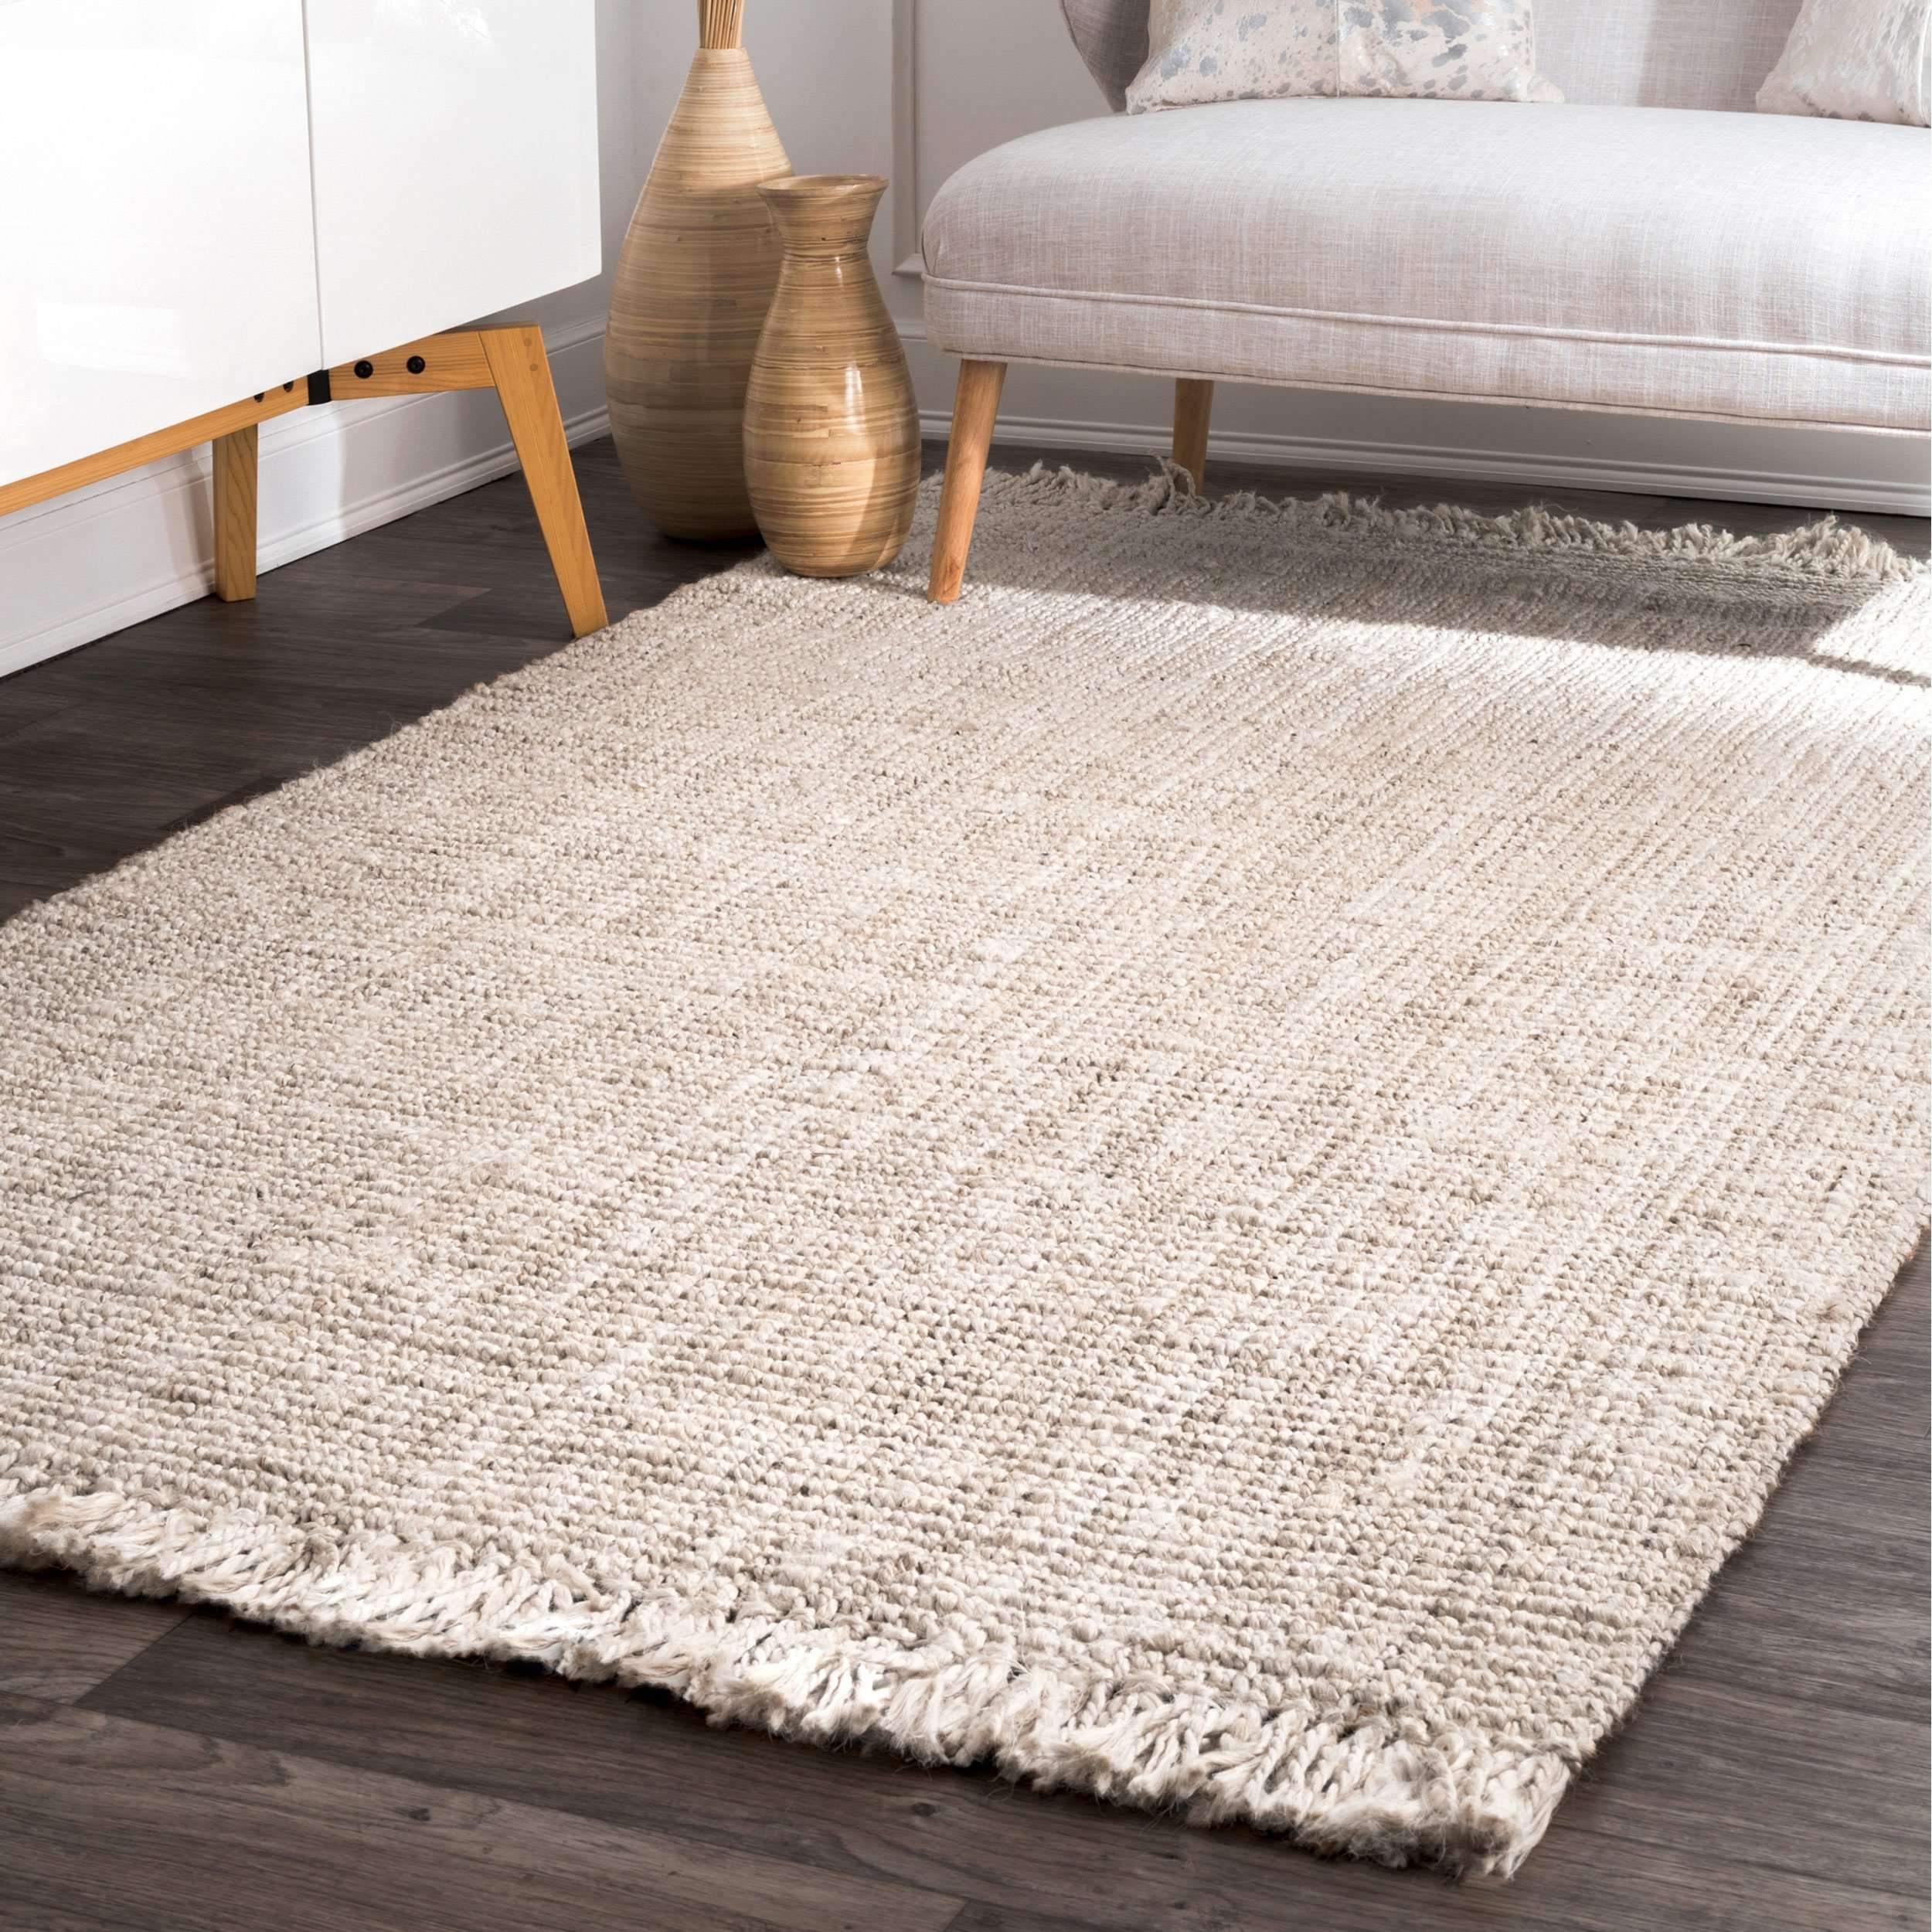 Hand Woven Chunky Loop Jute Area Rug - Off White - Image 1